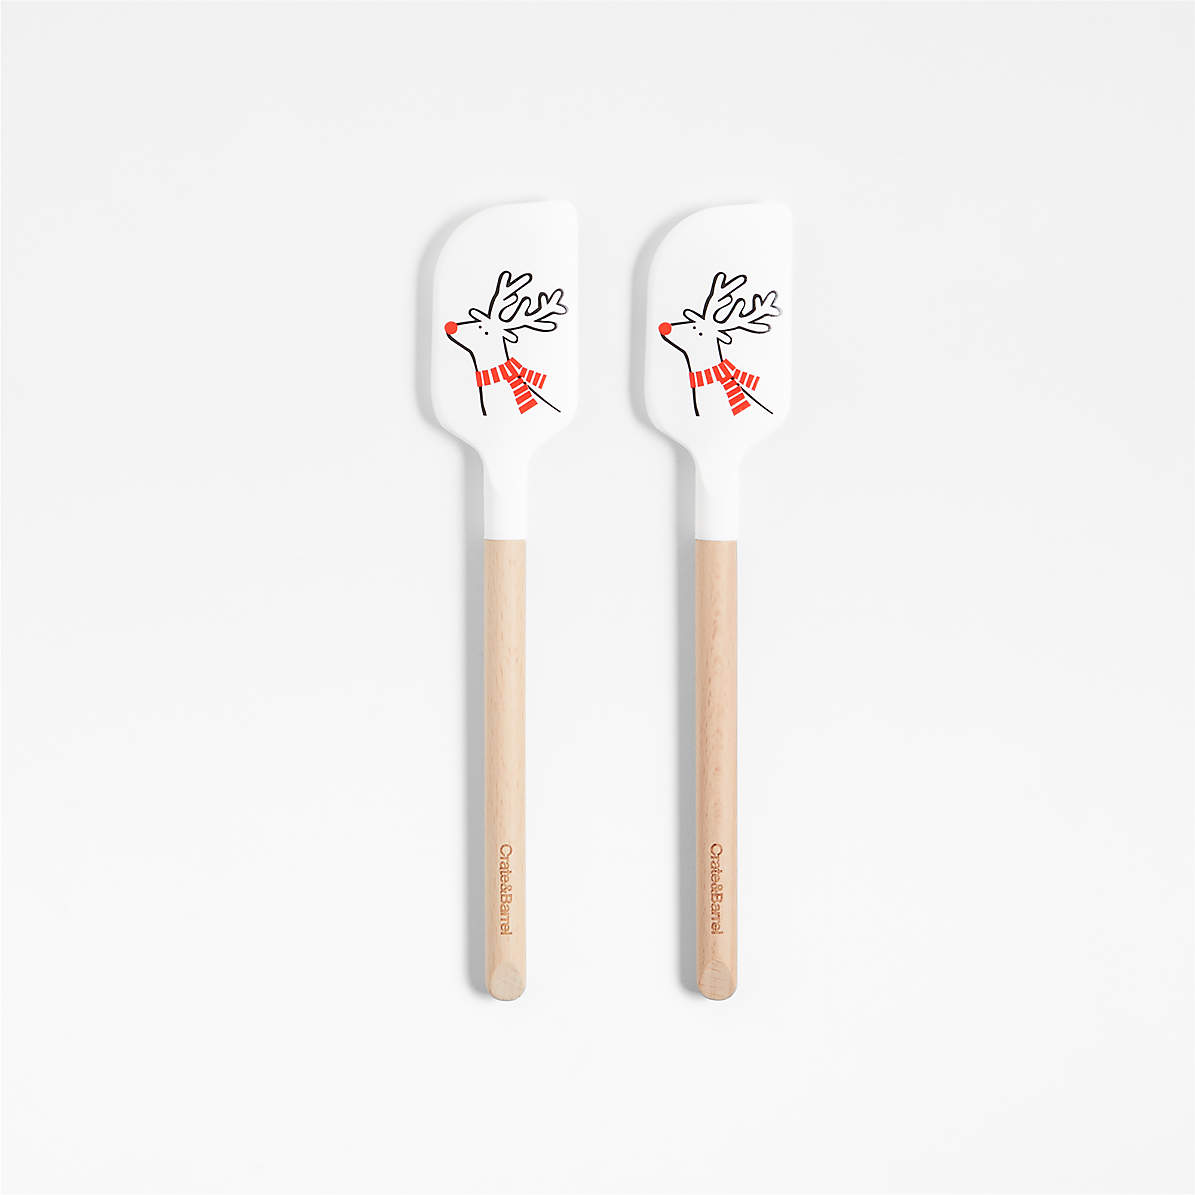 Crate & Barrel Wood and Sienna Orange Silicone Mini Spatulas, Set of 2 +  Reviews